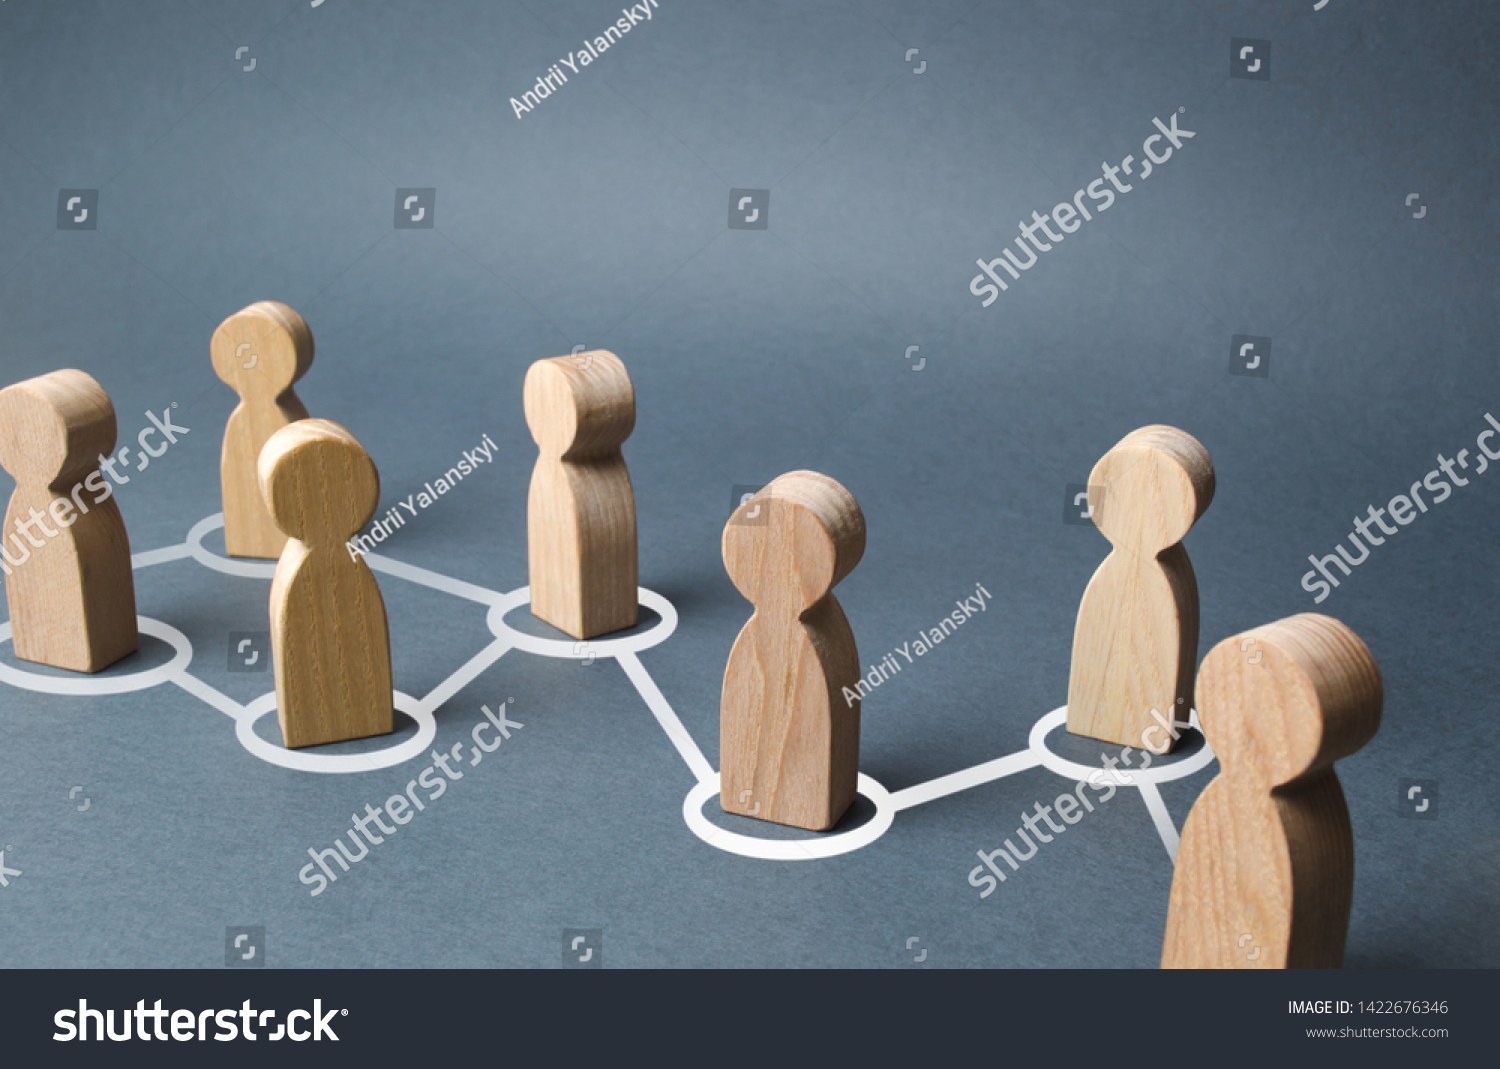 Chain of people figurines connected by white lines. Cooperation and interaction between people and employees. Dissemination of information in society, rumors. Communication. social contacts #1422676346